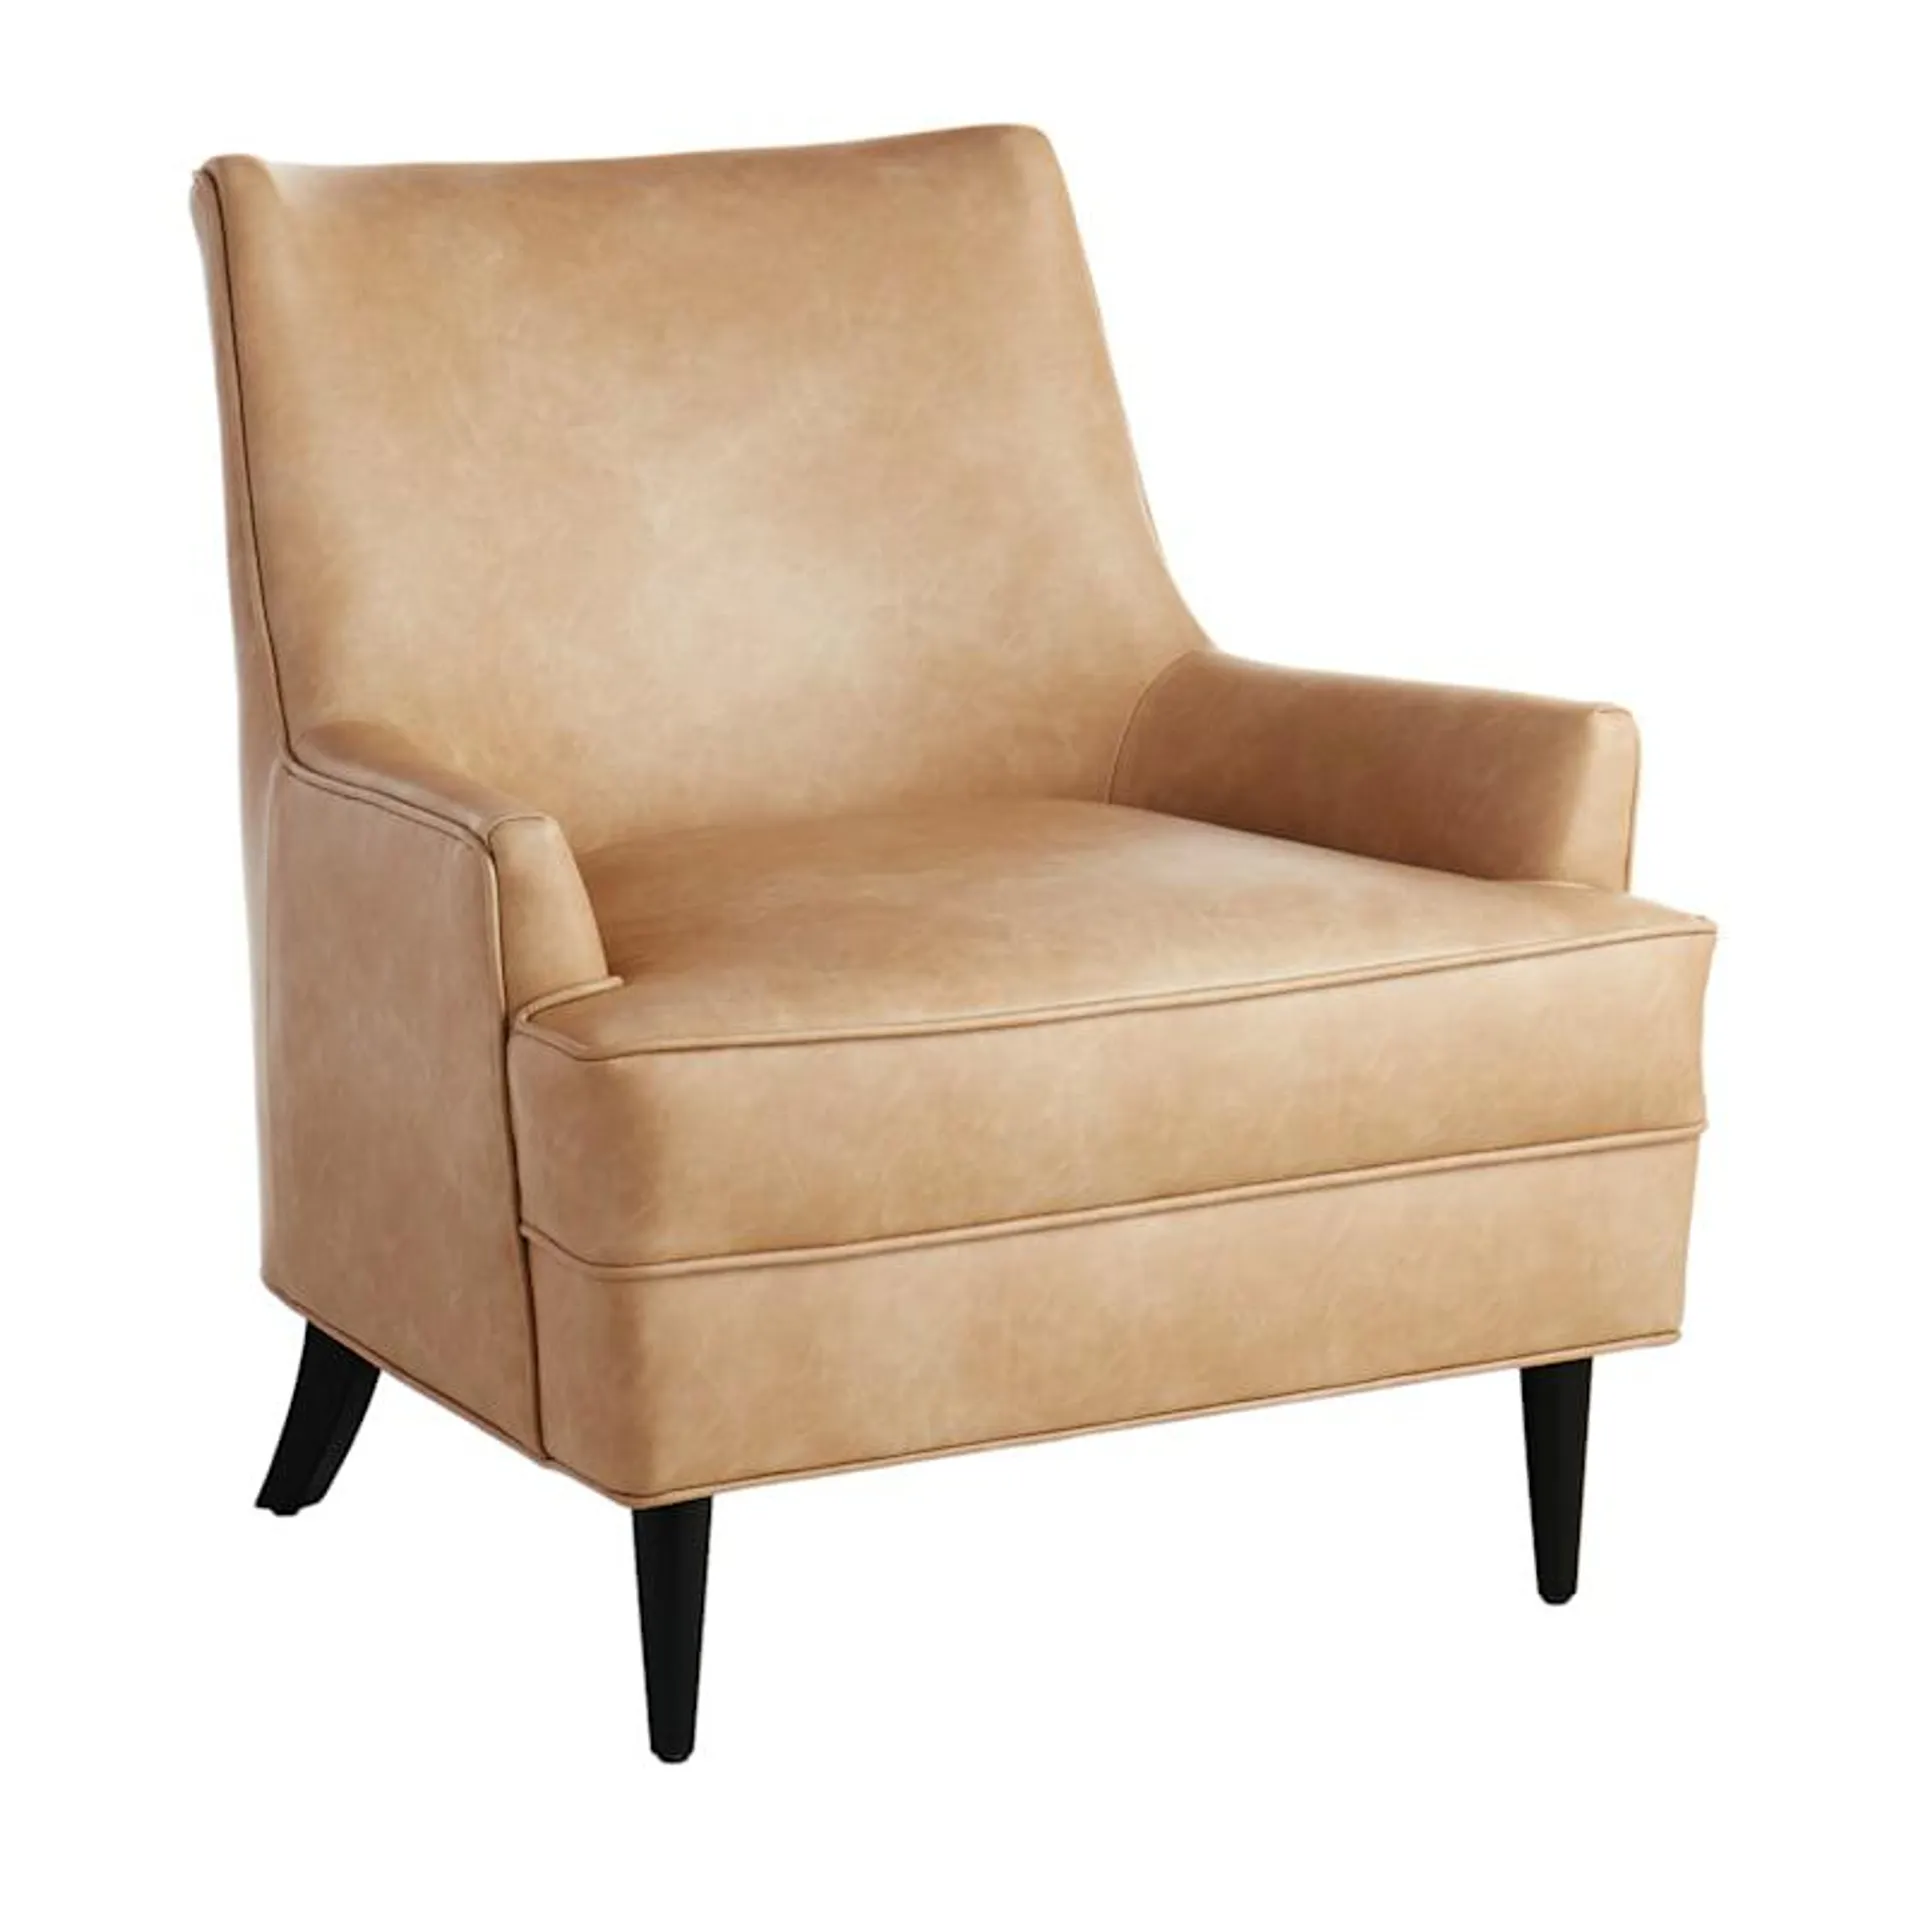 Colton Armchair Faux Leather Buff